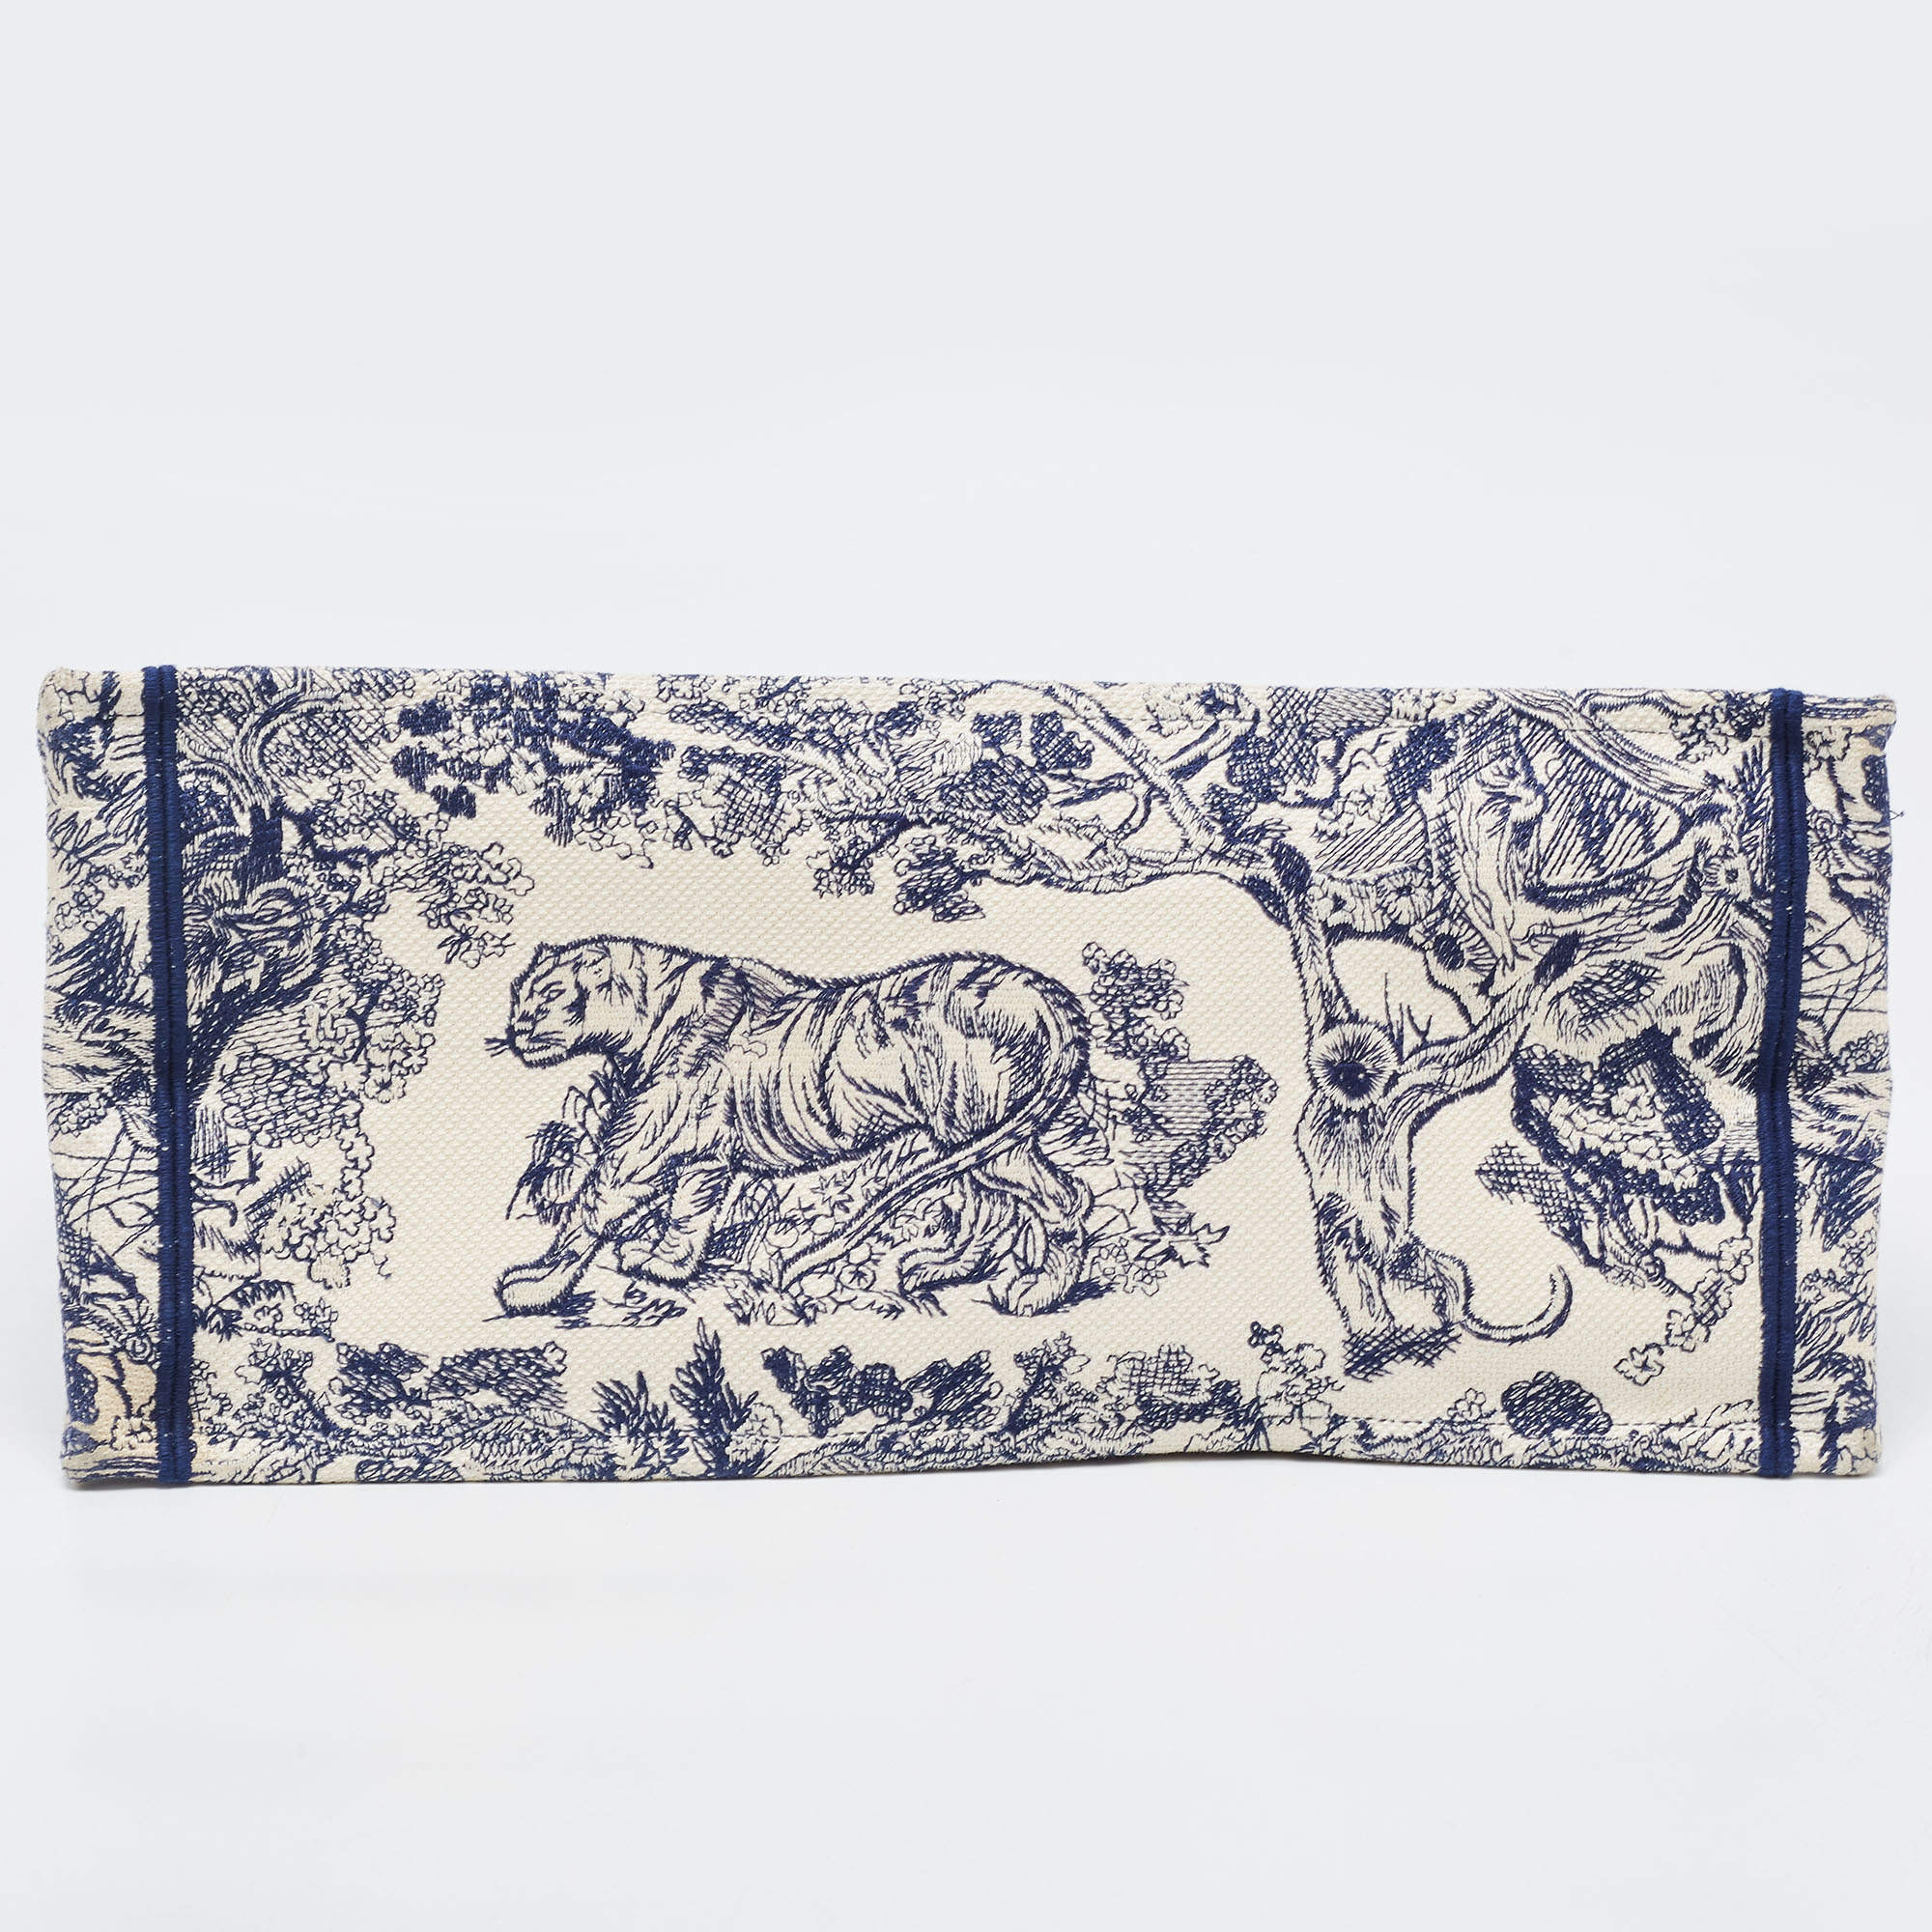 Dior - Small Dior Book Tote White and Navy Blue Toile de Jouy Embroidery (26.5 x 21 x 14 cm) - Women